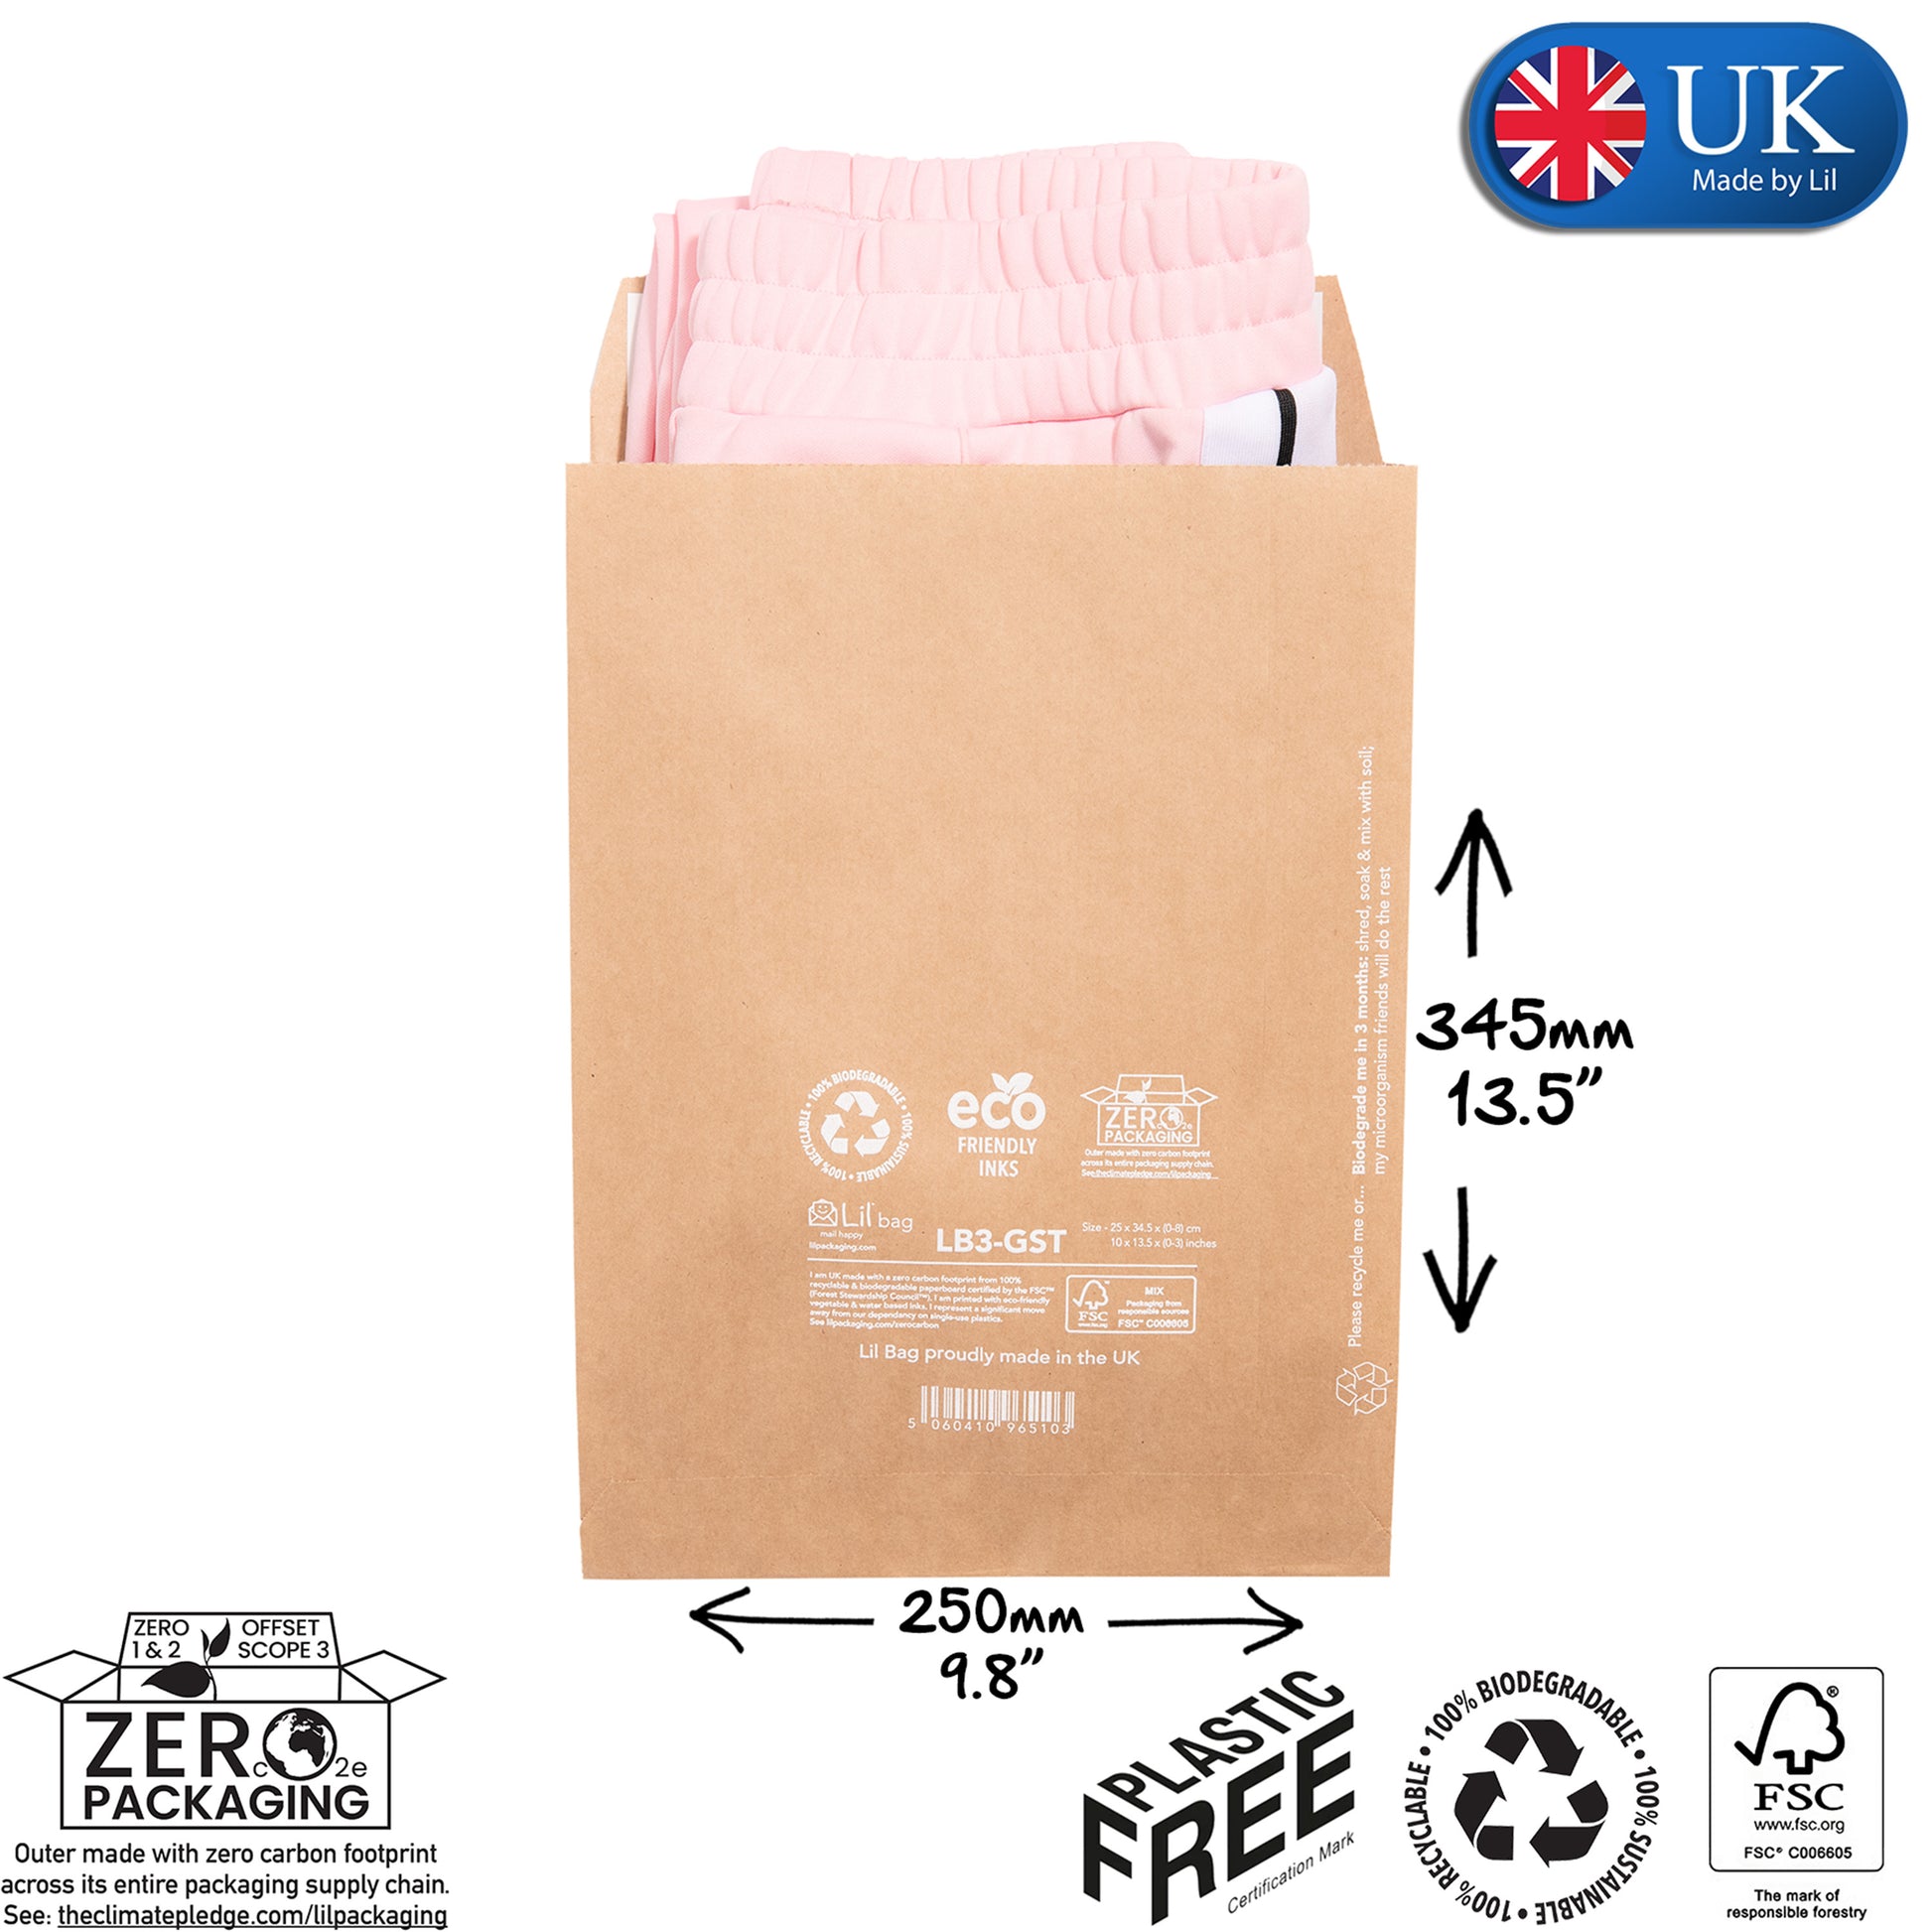 LB3-gst Gusseted Paper Mail Bag | Lil Packaging